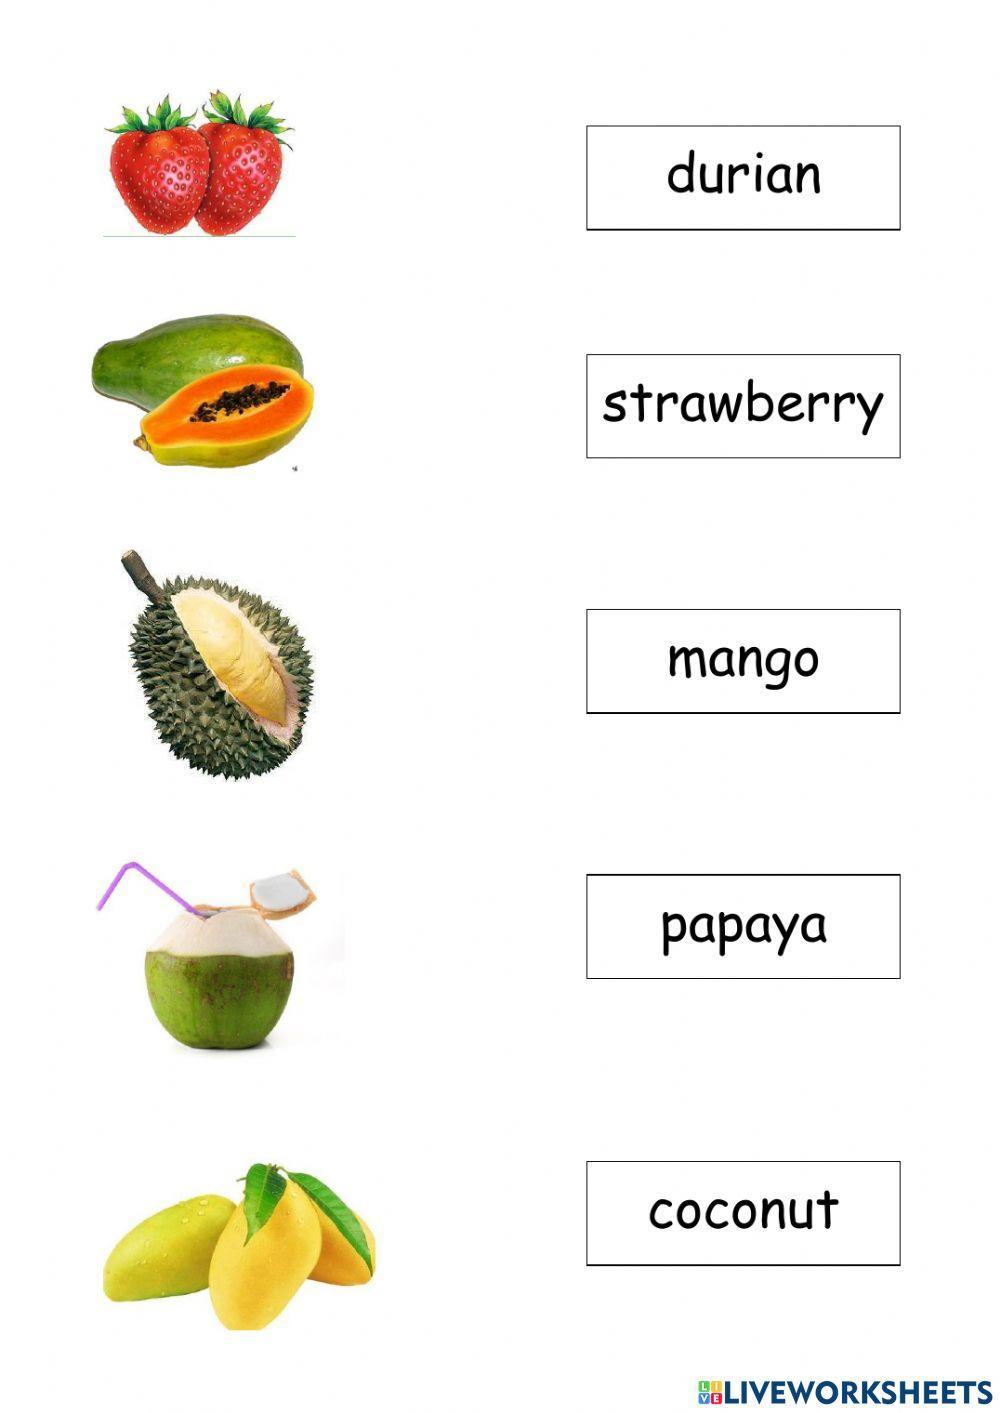 match the fruits